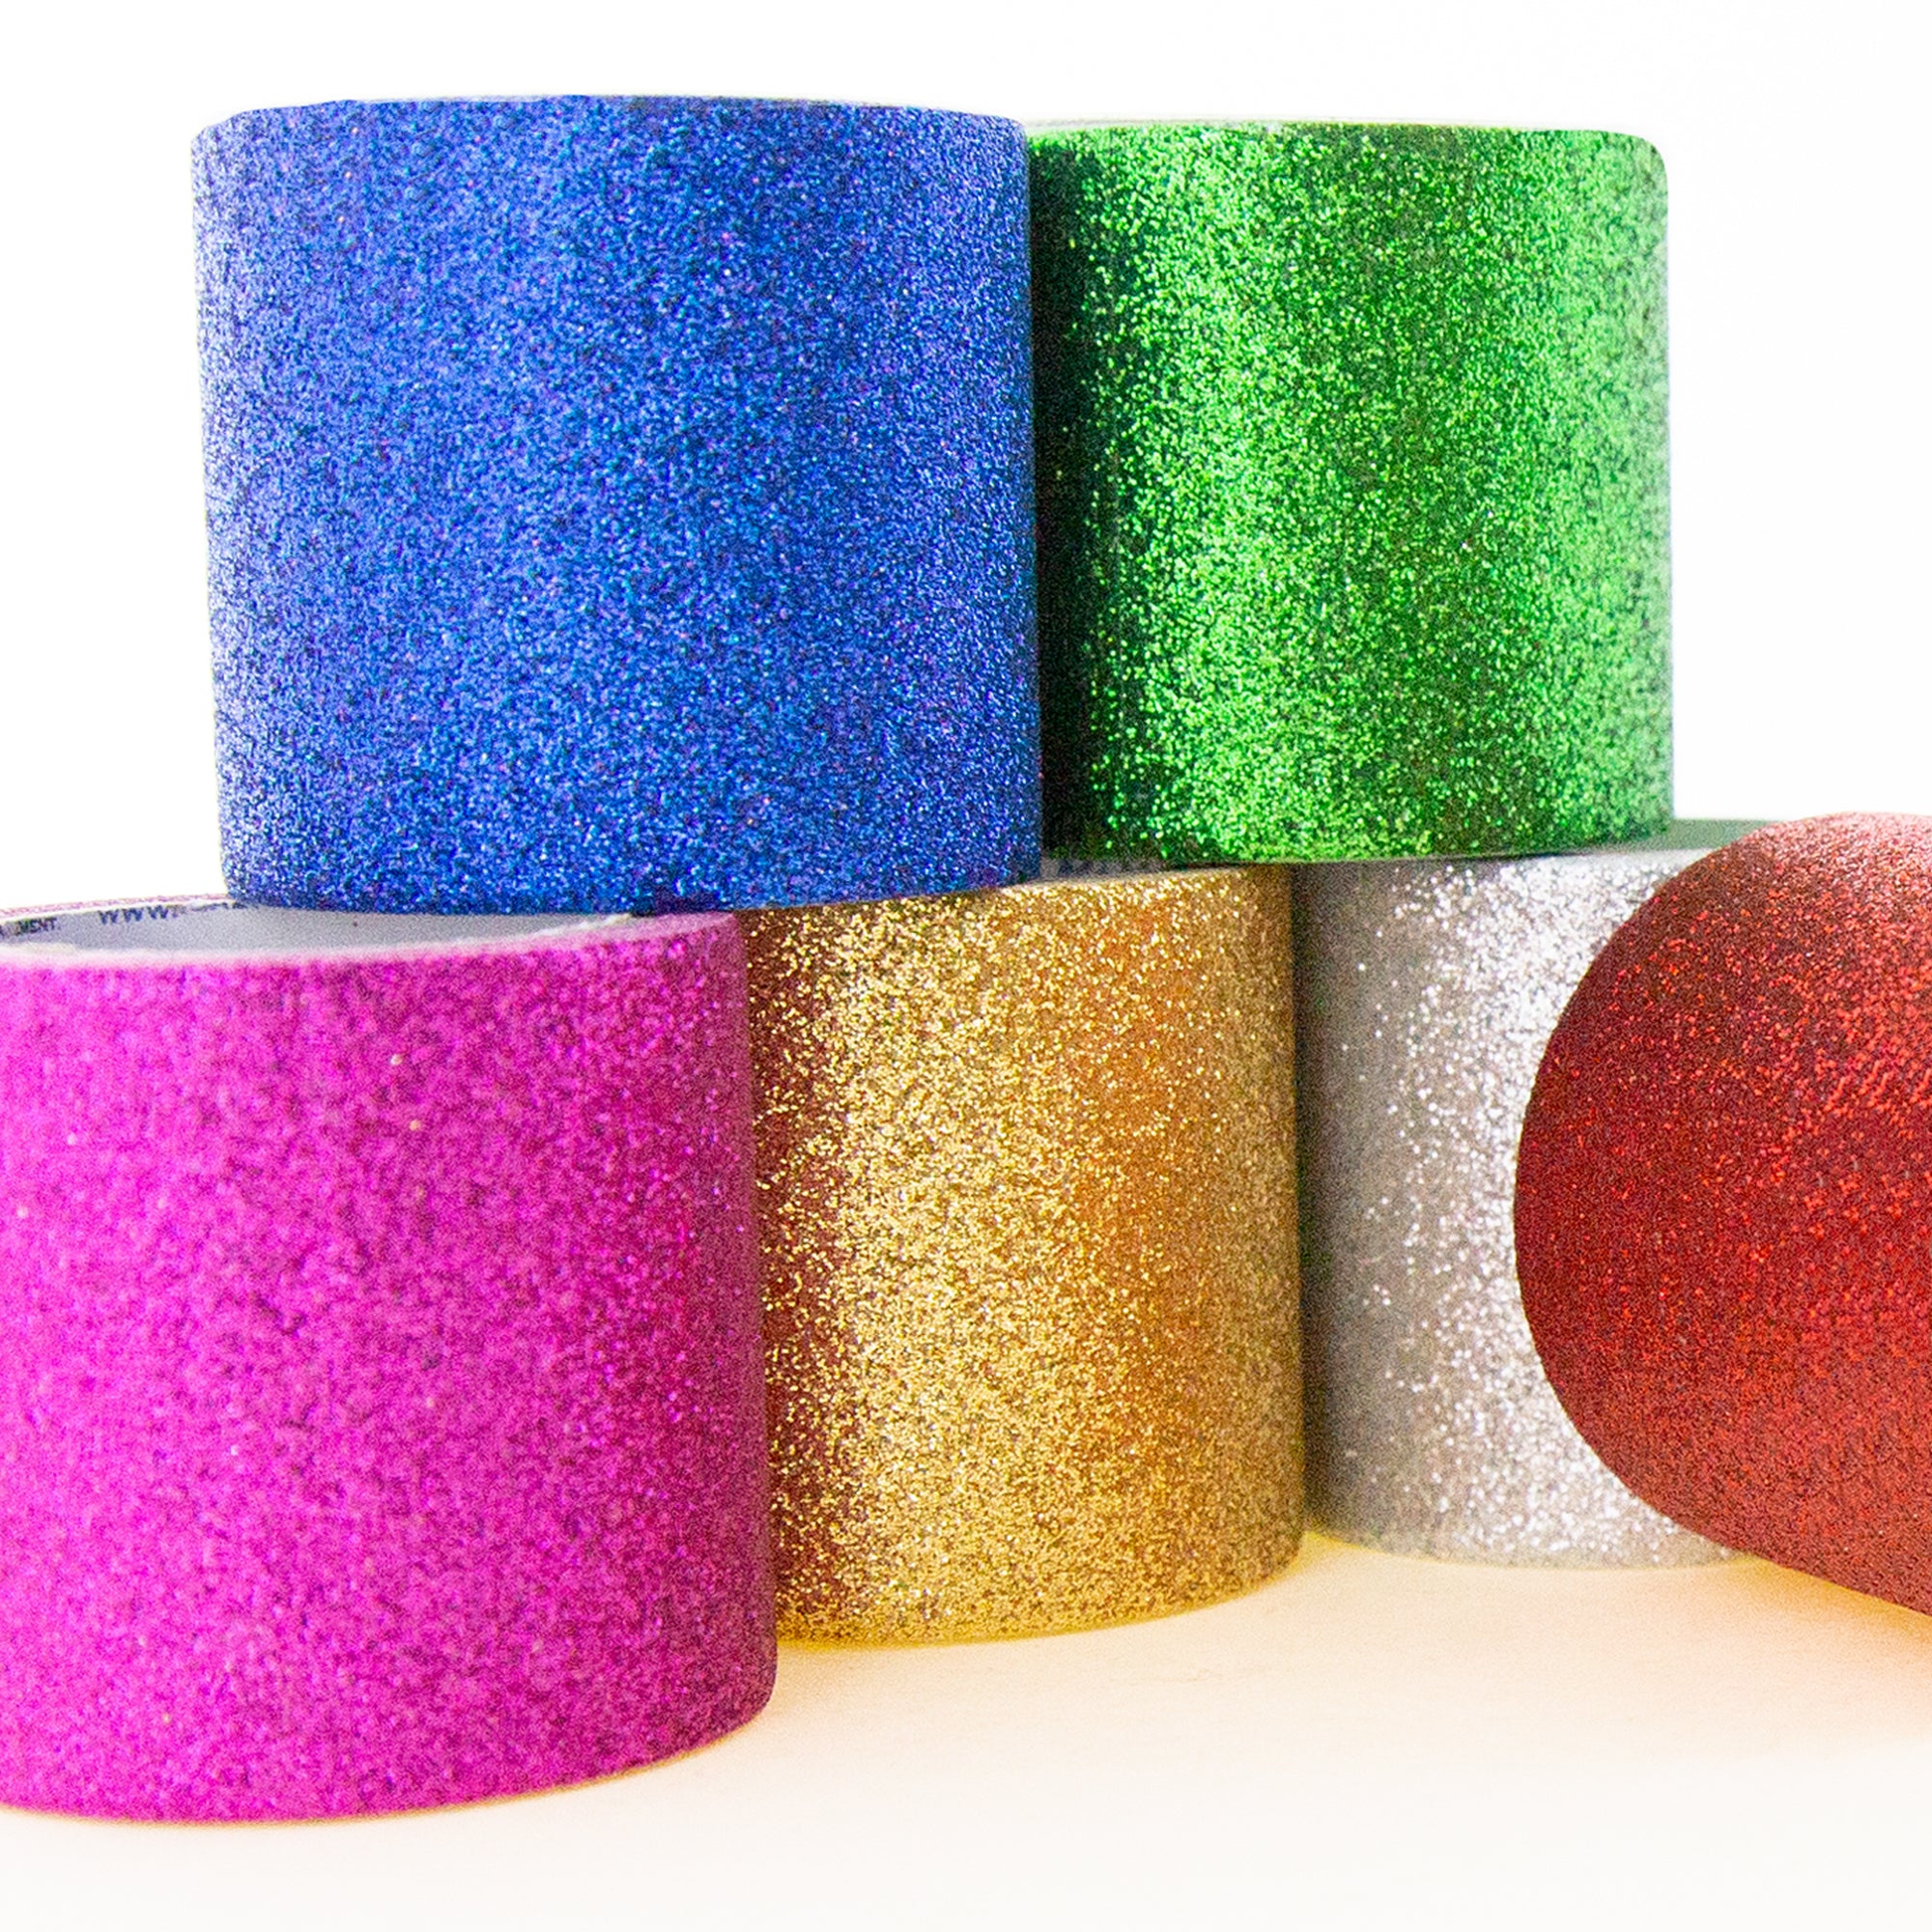 Bazic Products 960 1.88 x 3 Yards Glitter Tape - Pack of 36